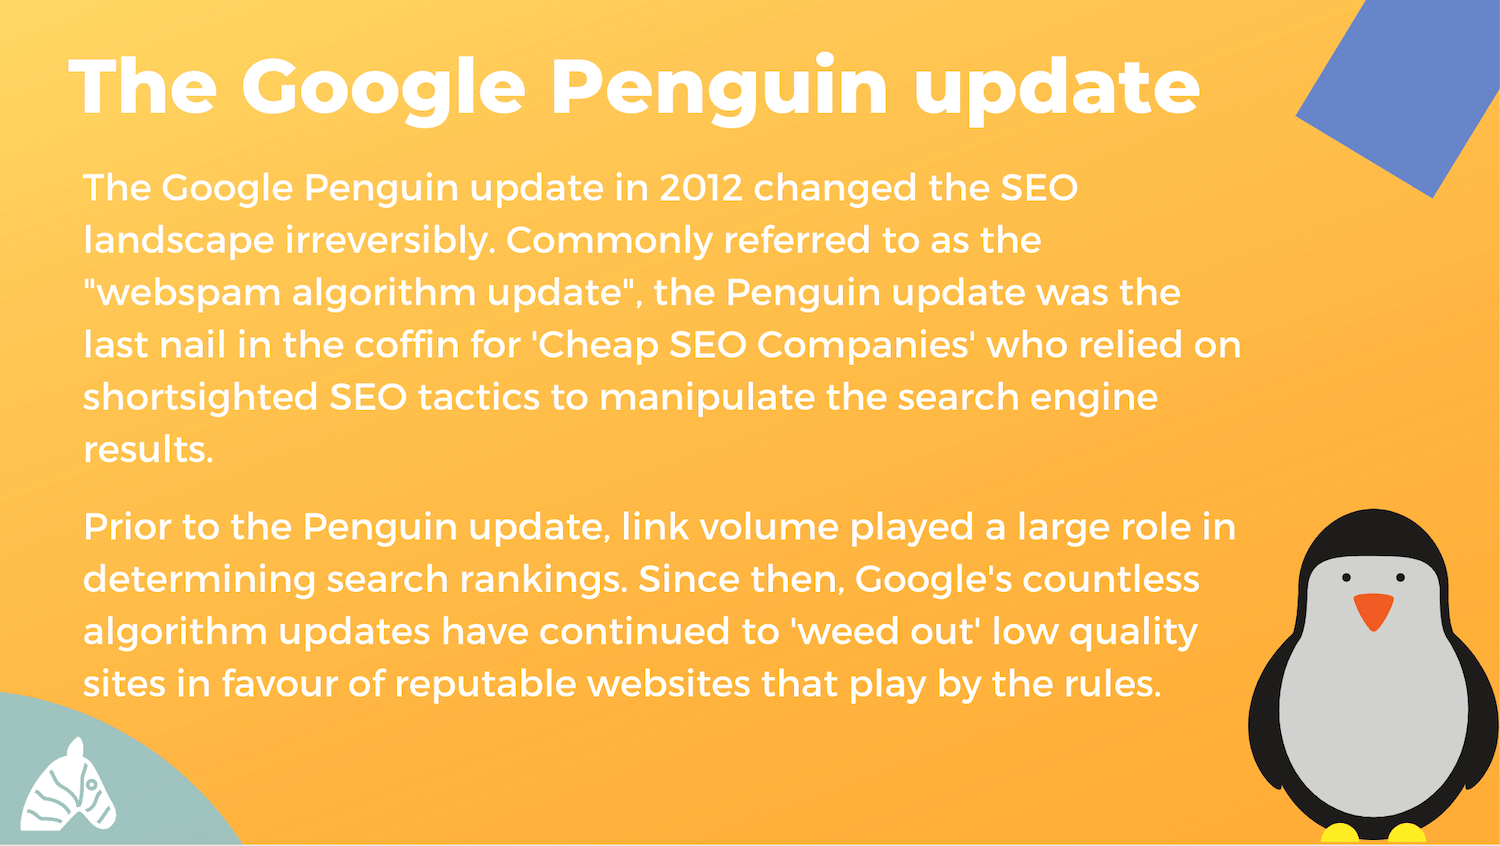 What the Google Penguin update means for websites